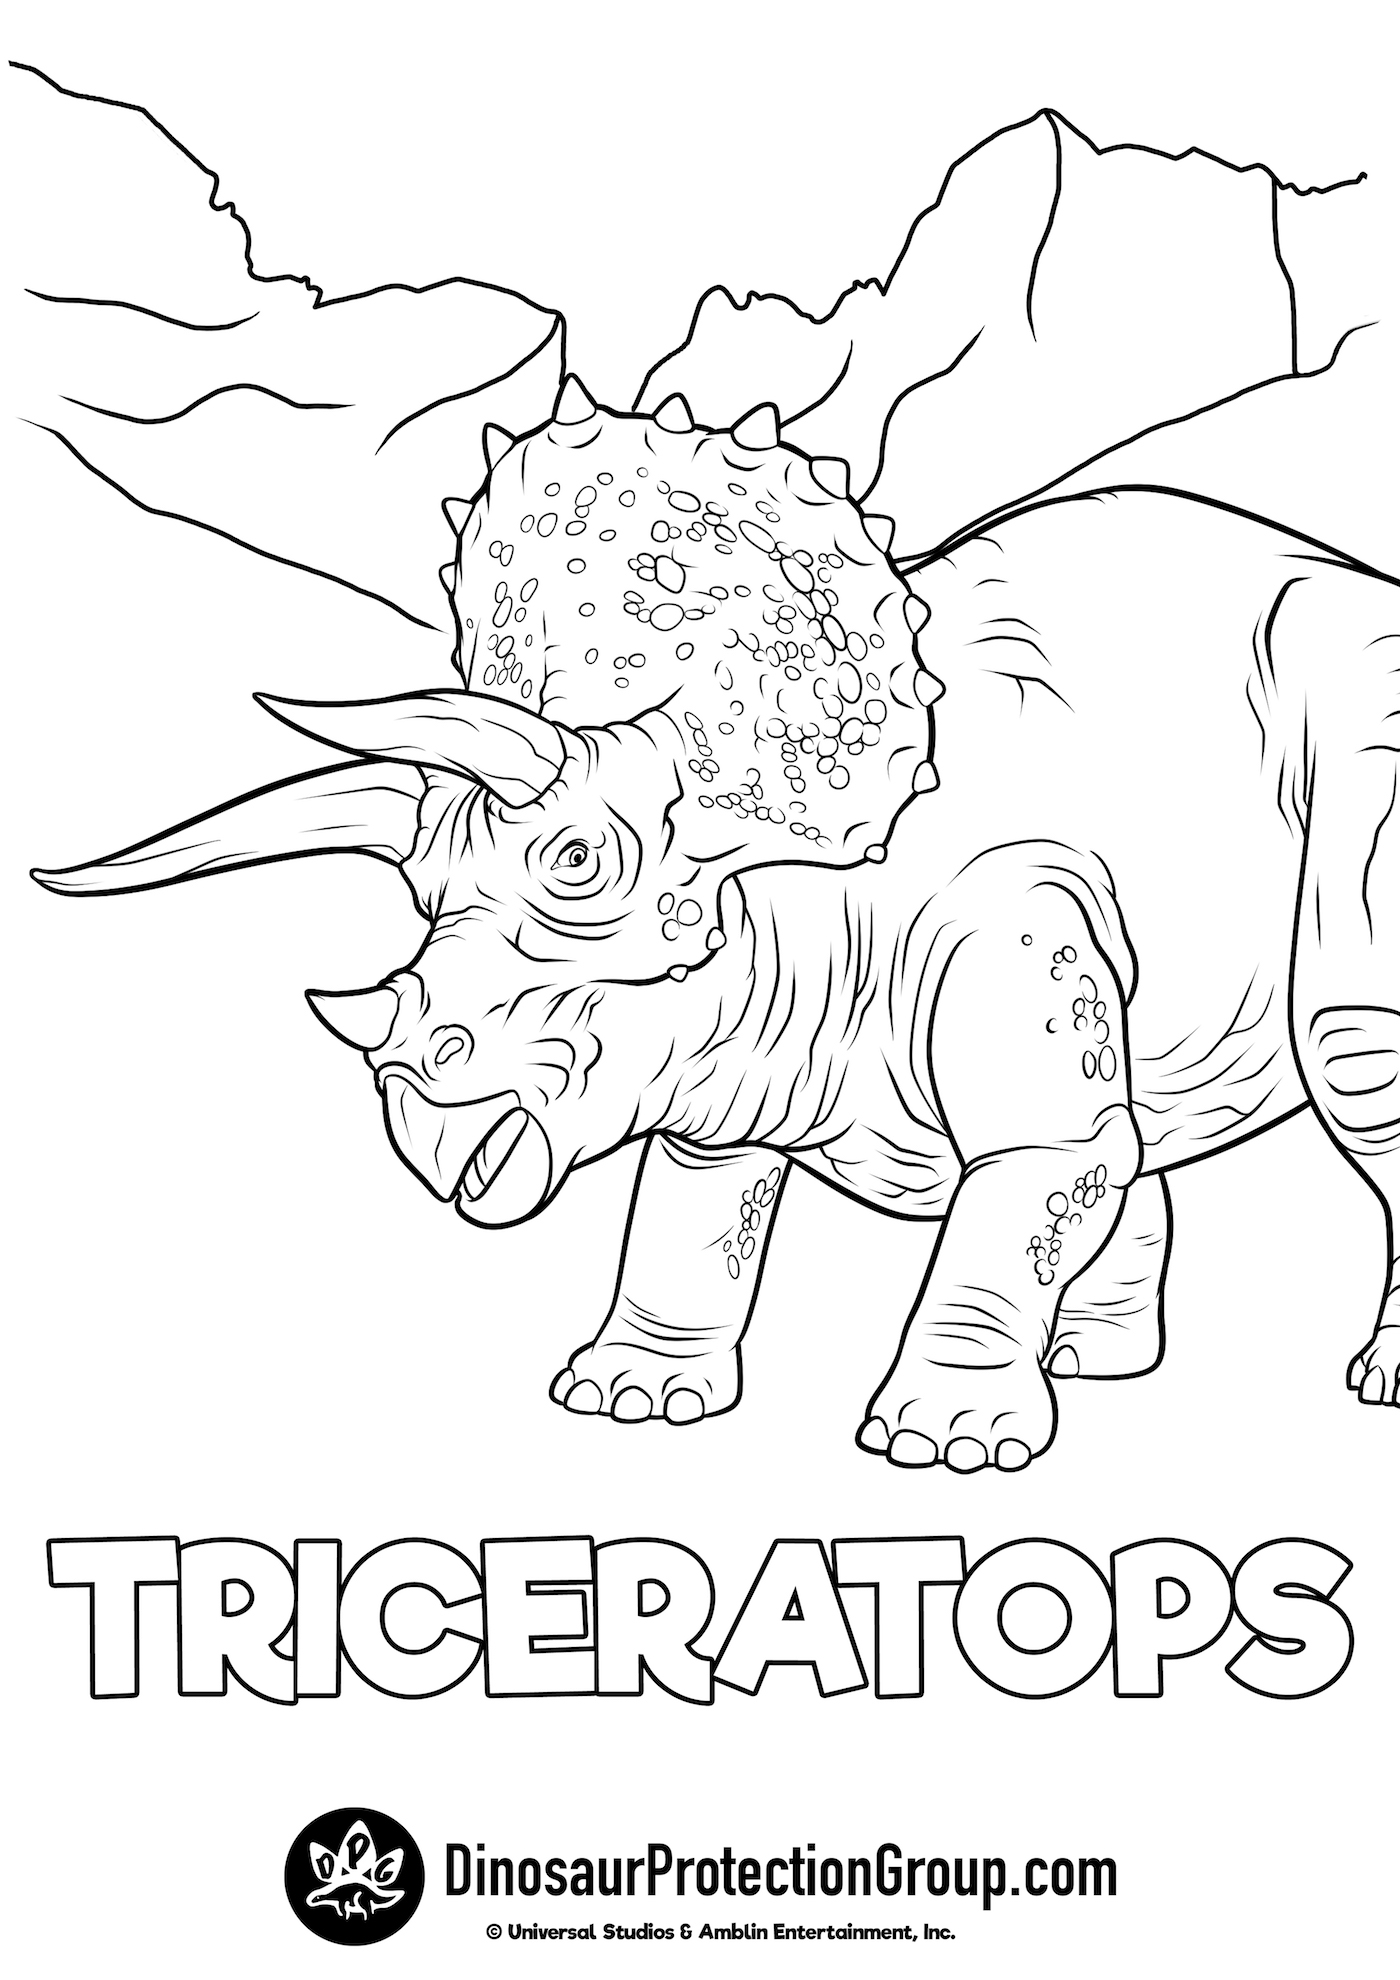 Jurassic World Coloring Pages Triceratops - Negra Wallpaper